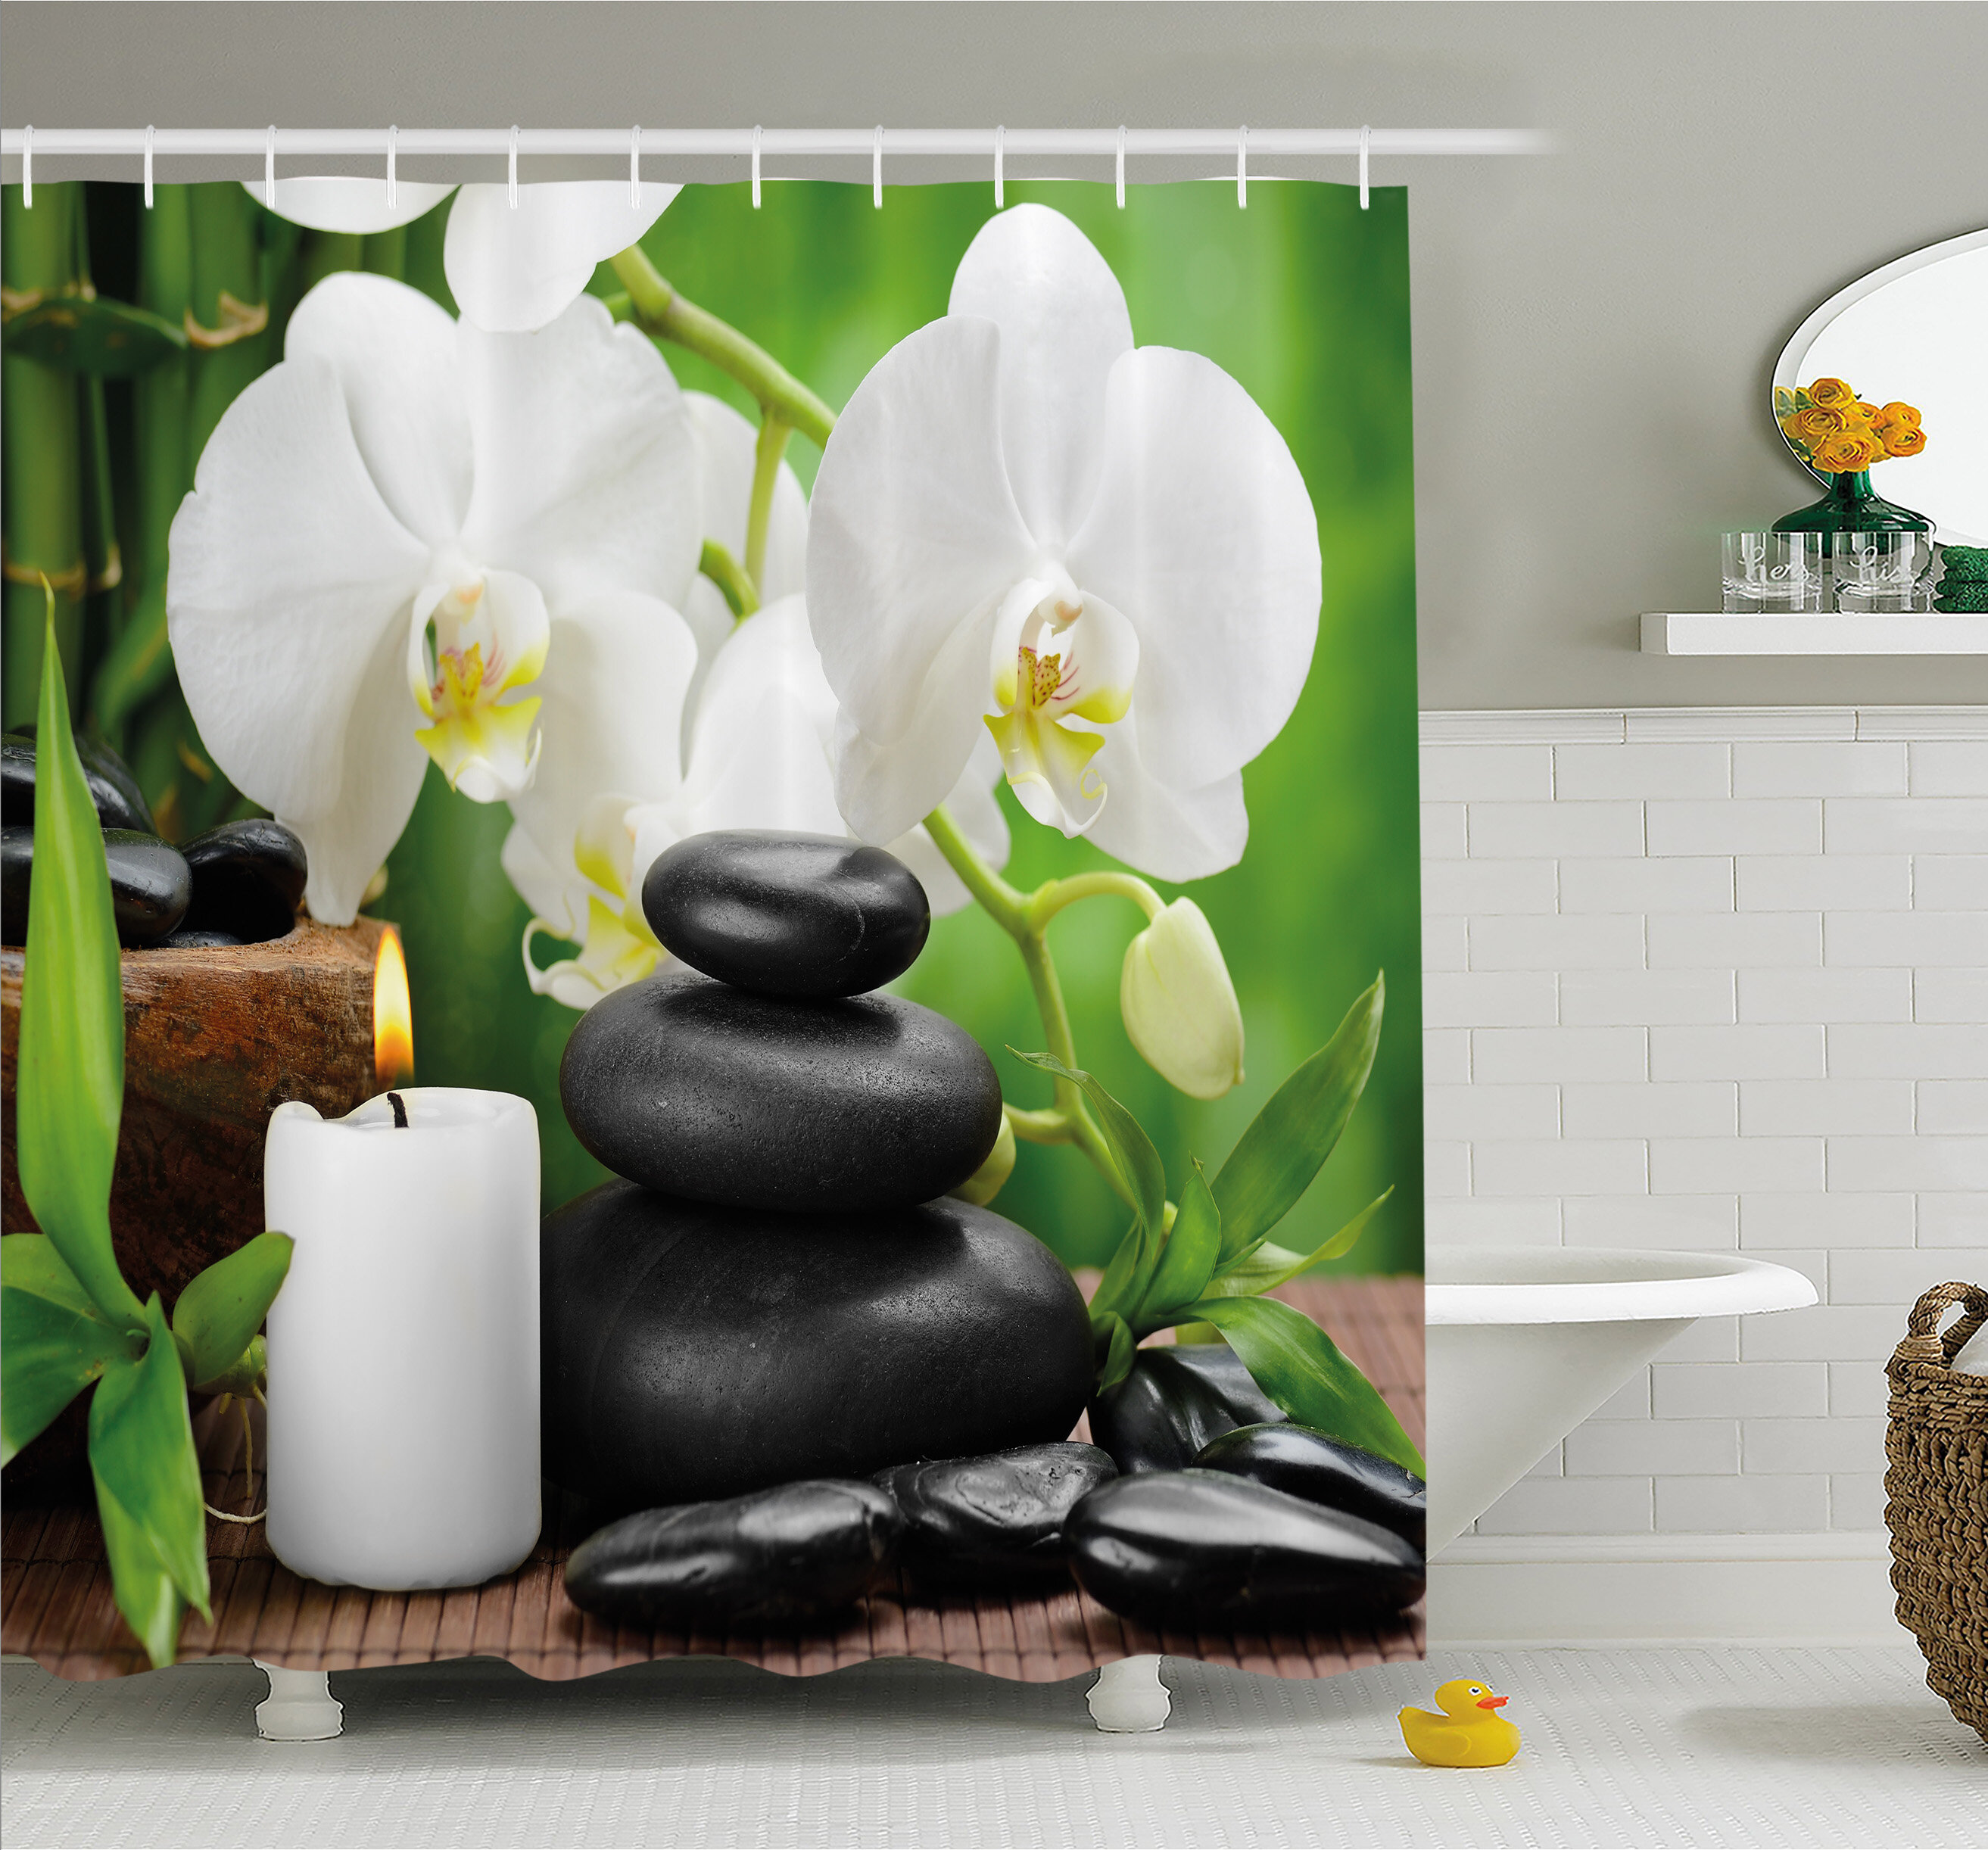 Orchid Green Bamboo Shower Curtain Spa Zen Massage Stones For Bathroom Decor